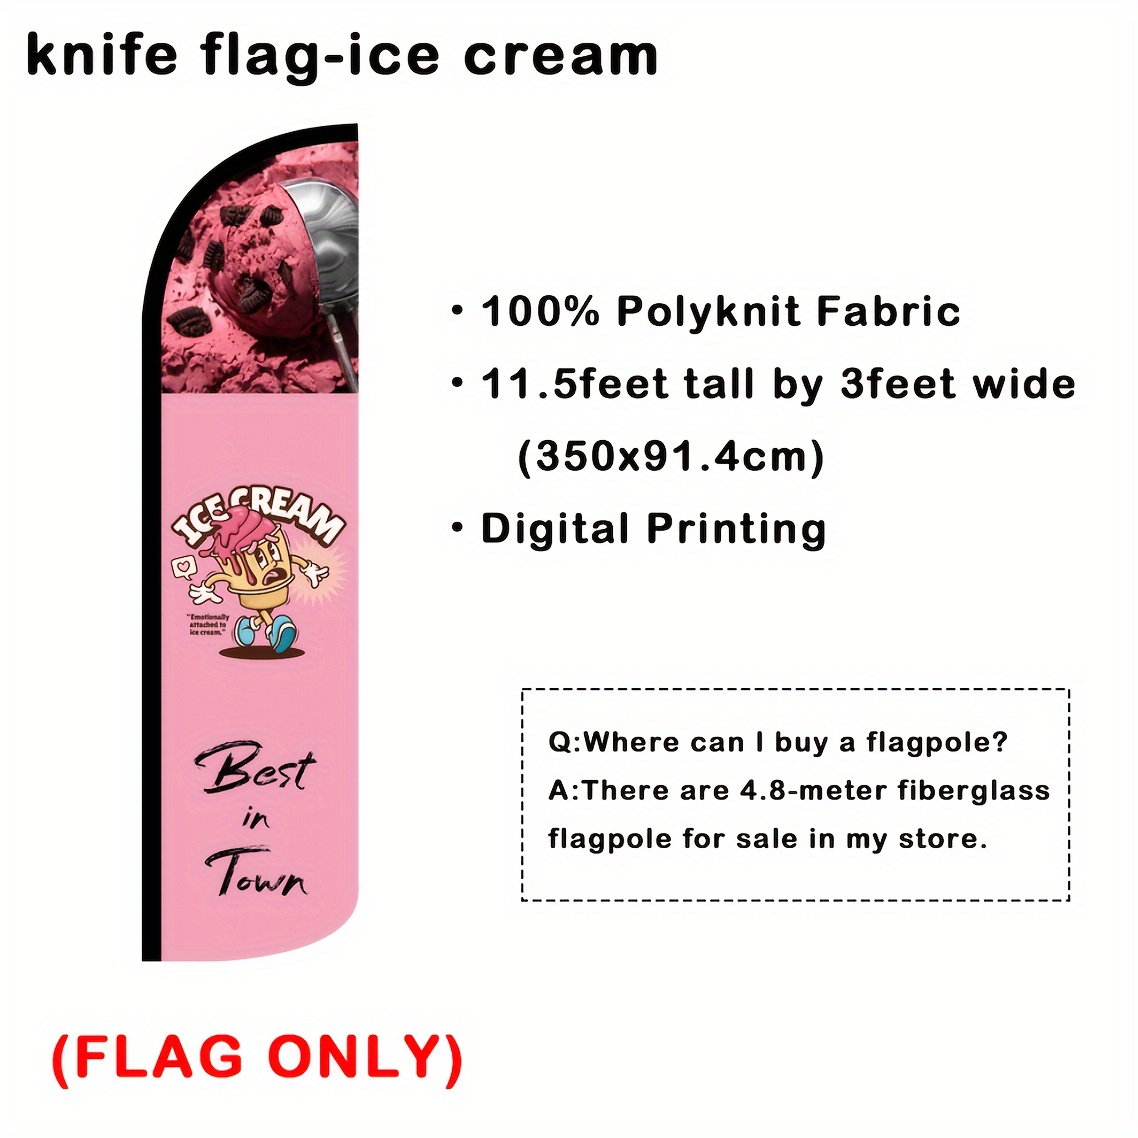 

1pc, Ice Cream Shop Advertising Knife Flag, The Size Of 3x11.5ft (91.4x350cm), The Material Of 110g/m2 Of The Fabric, With Digital Printing Craft. This Product Does Not Include The Flagpole